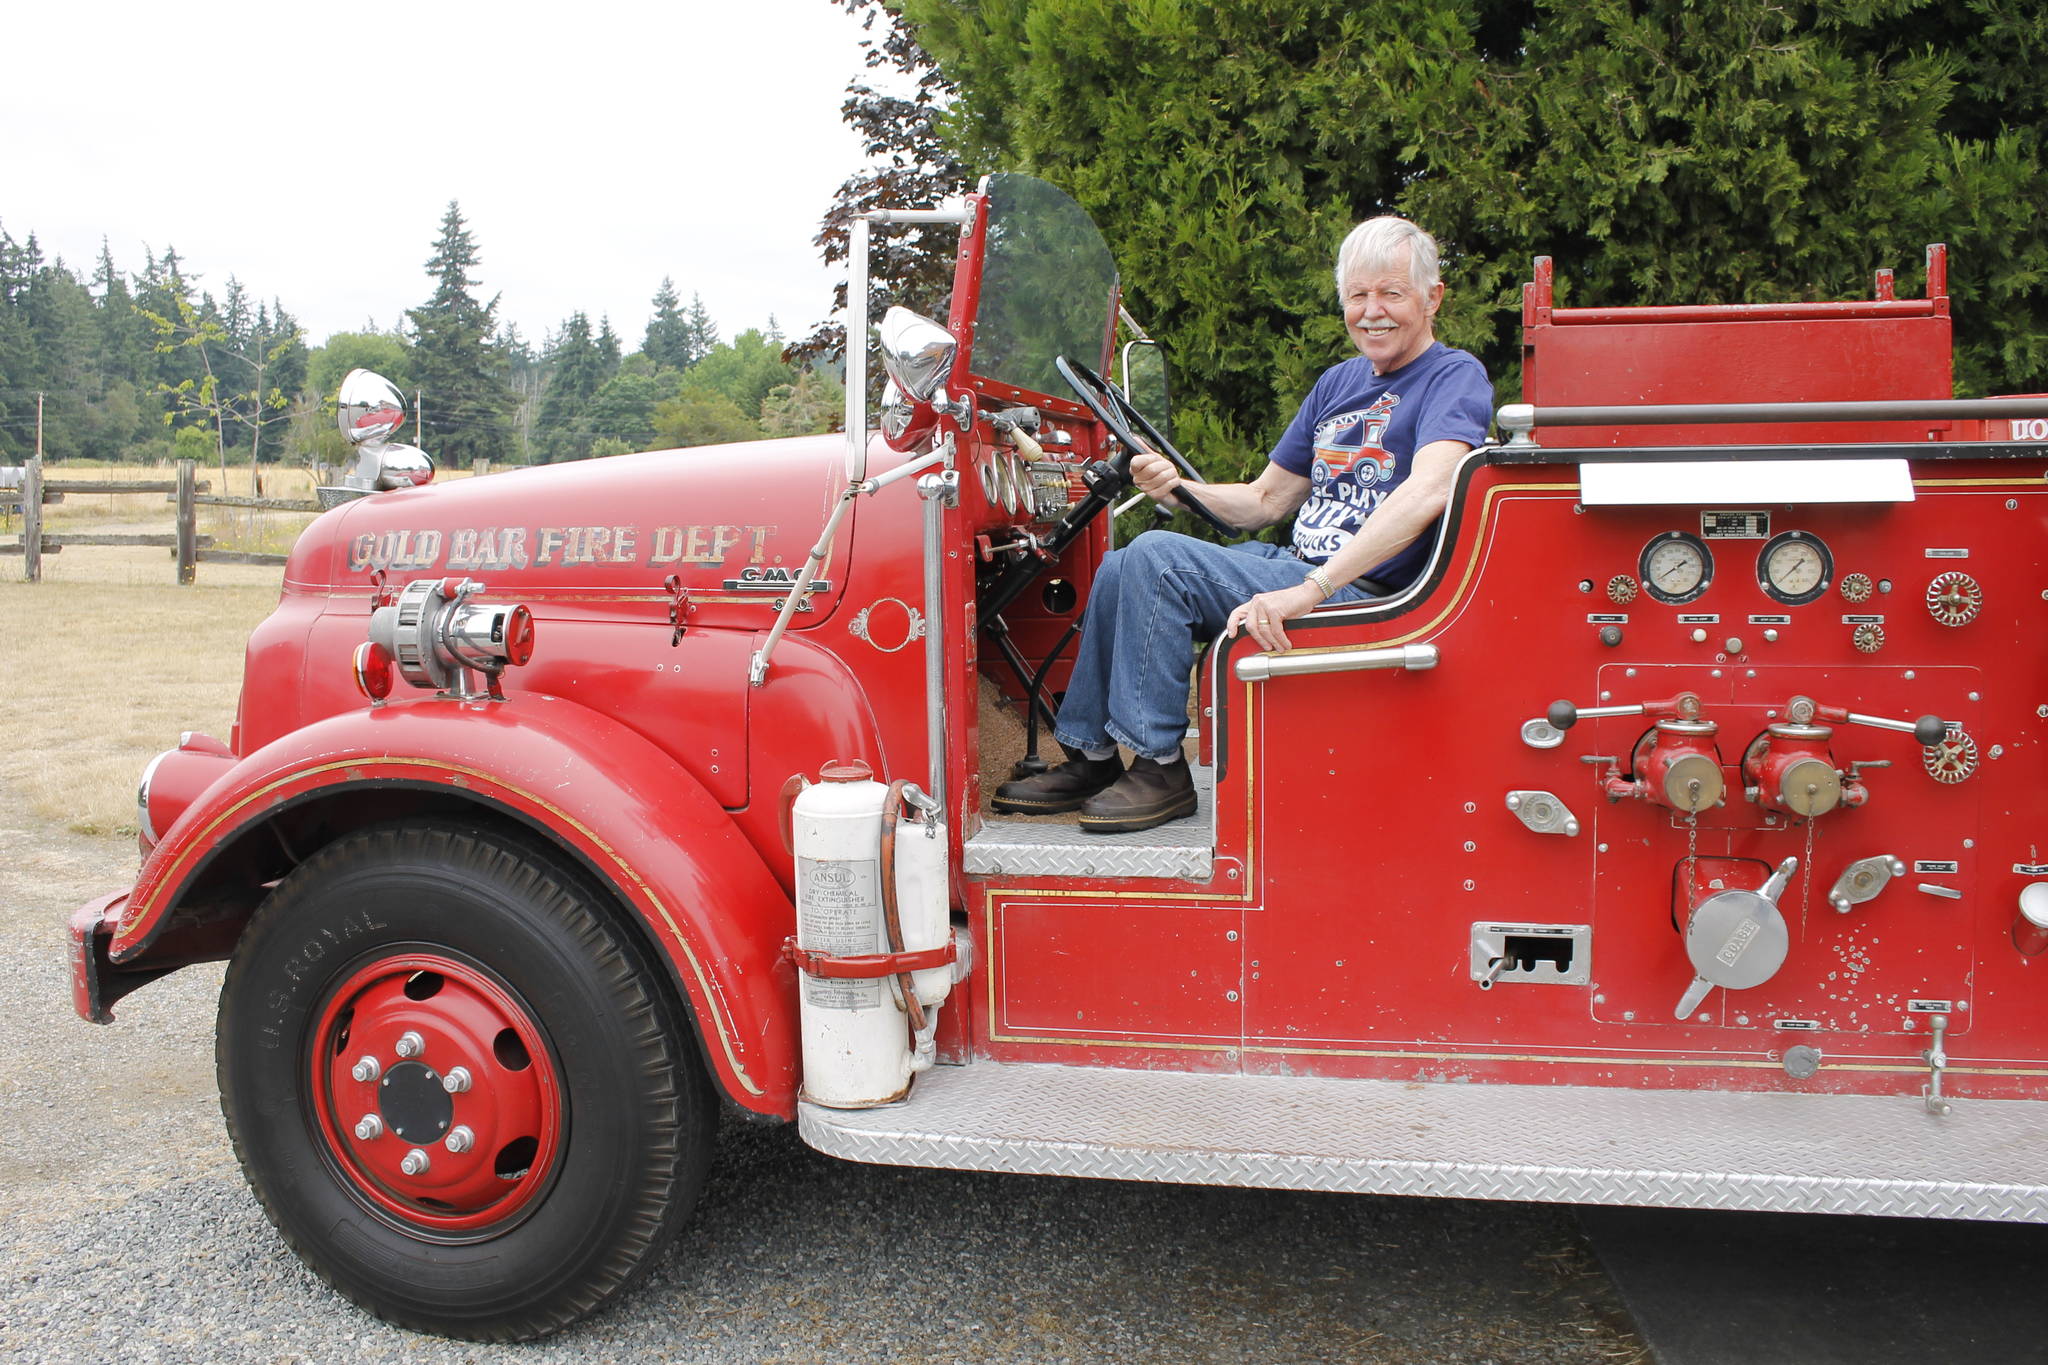 Gary Gabelein, this year’s grand marshal of the Whidbey Island Fair parade, sits atop his 1951 fire engine. (Photo by Kira Erickson/Whidbey News-Times)